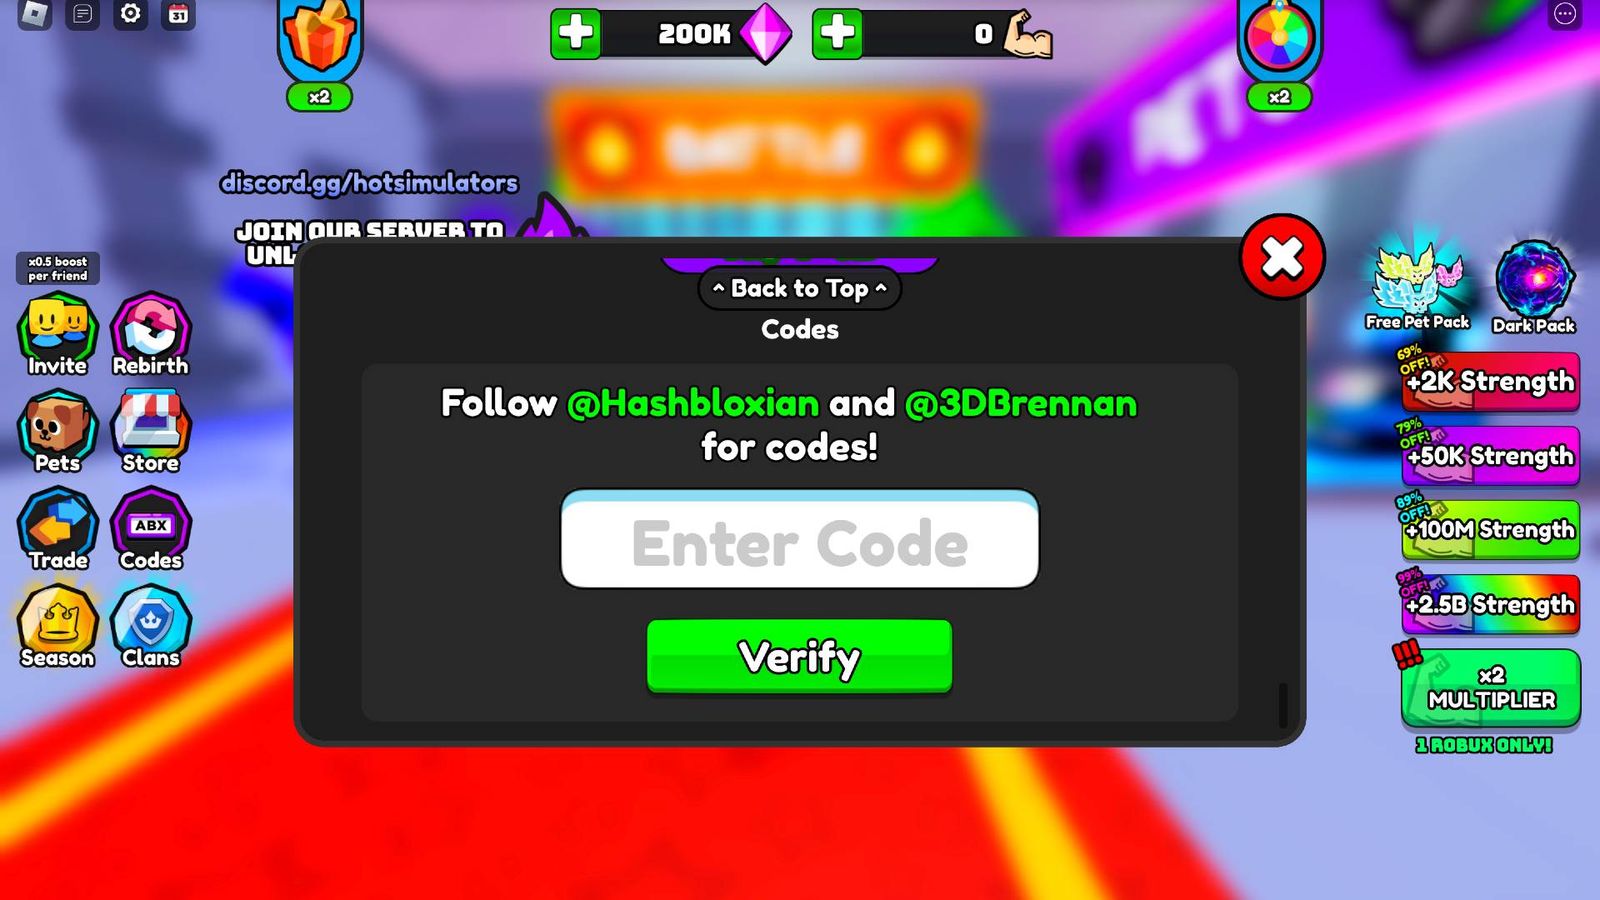 The code redemption screen in Power Punch Simulator.